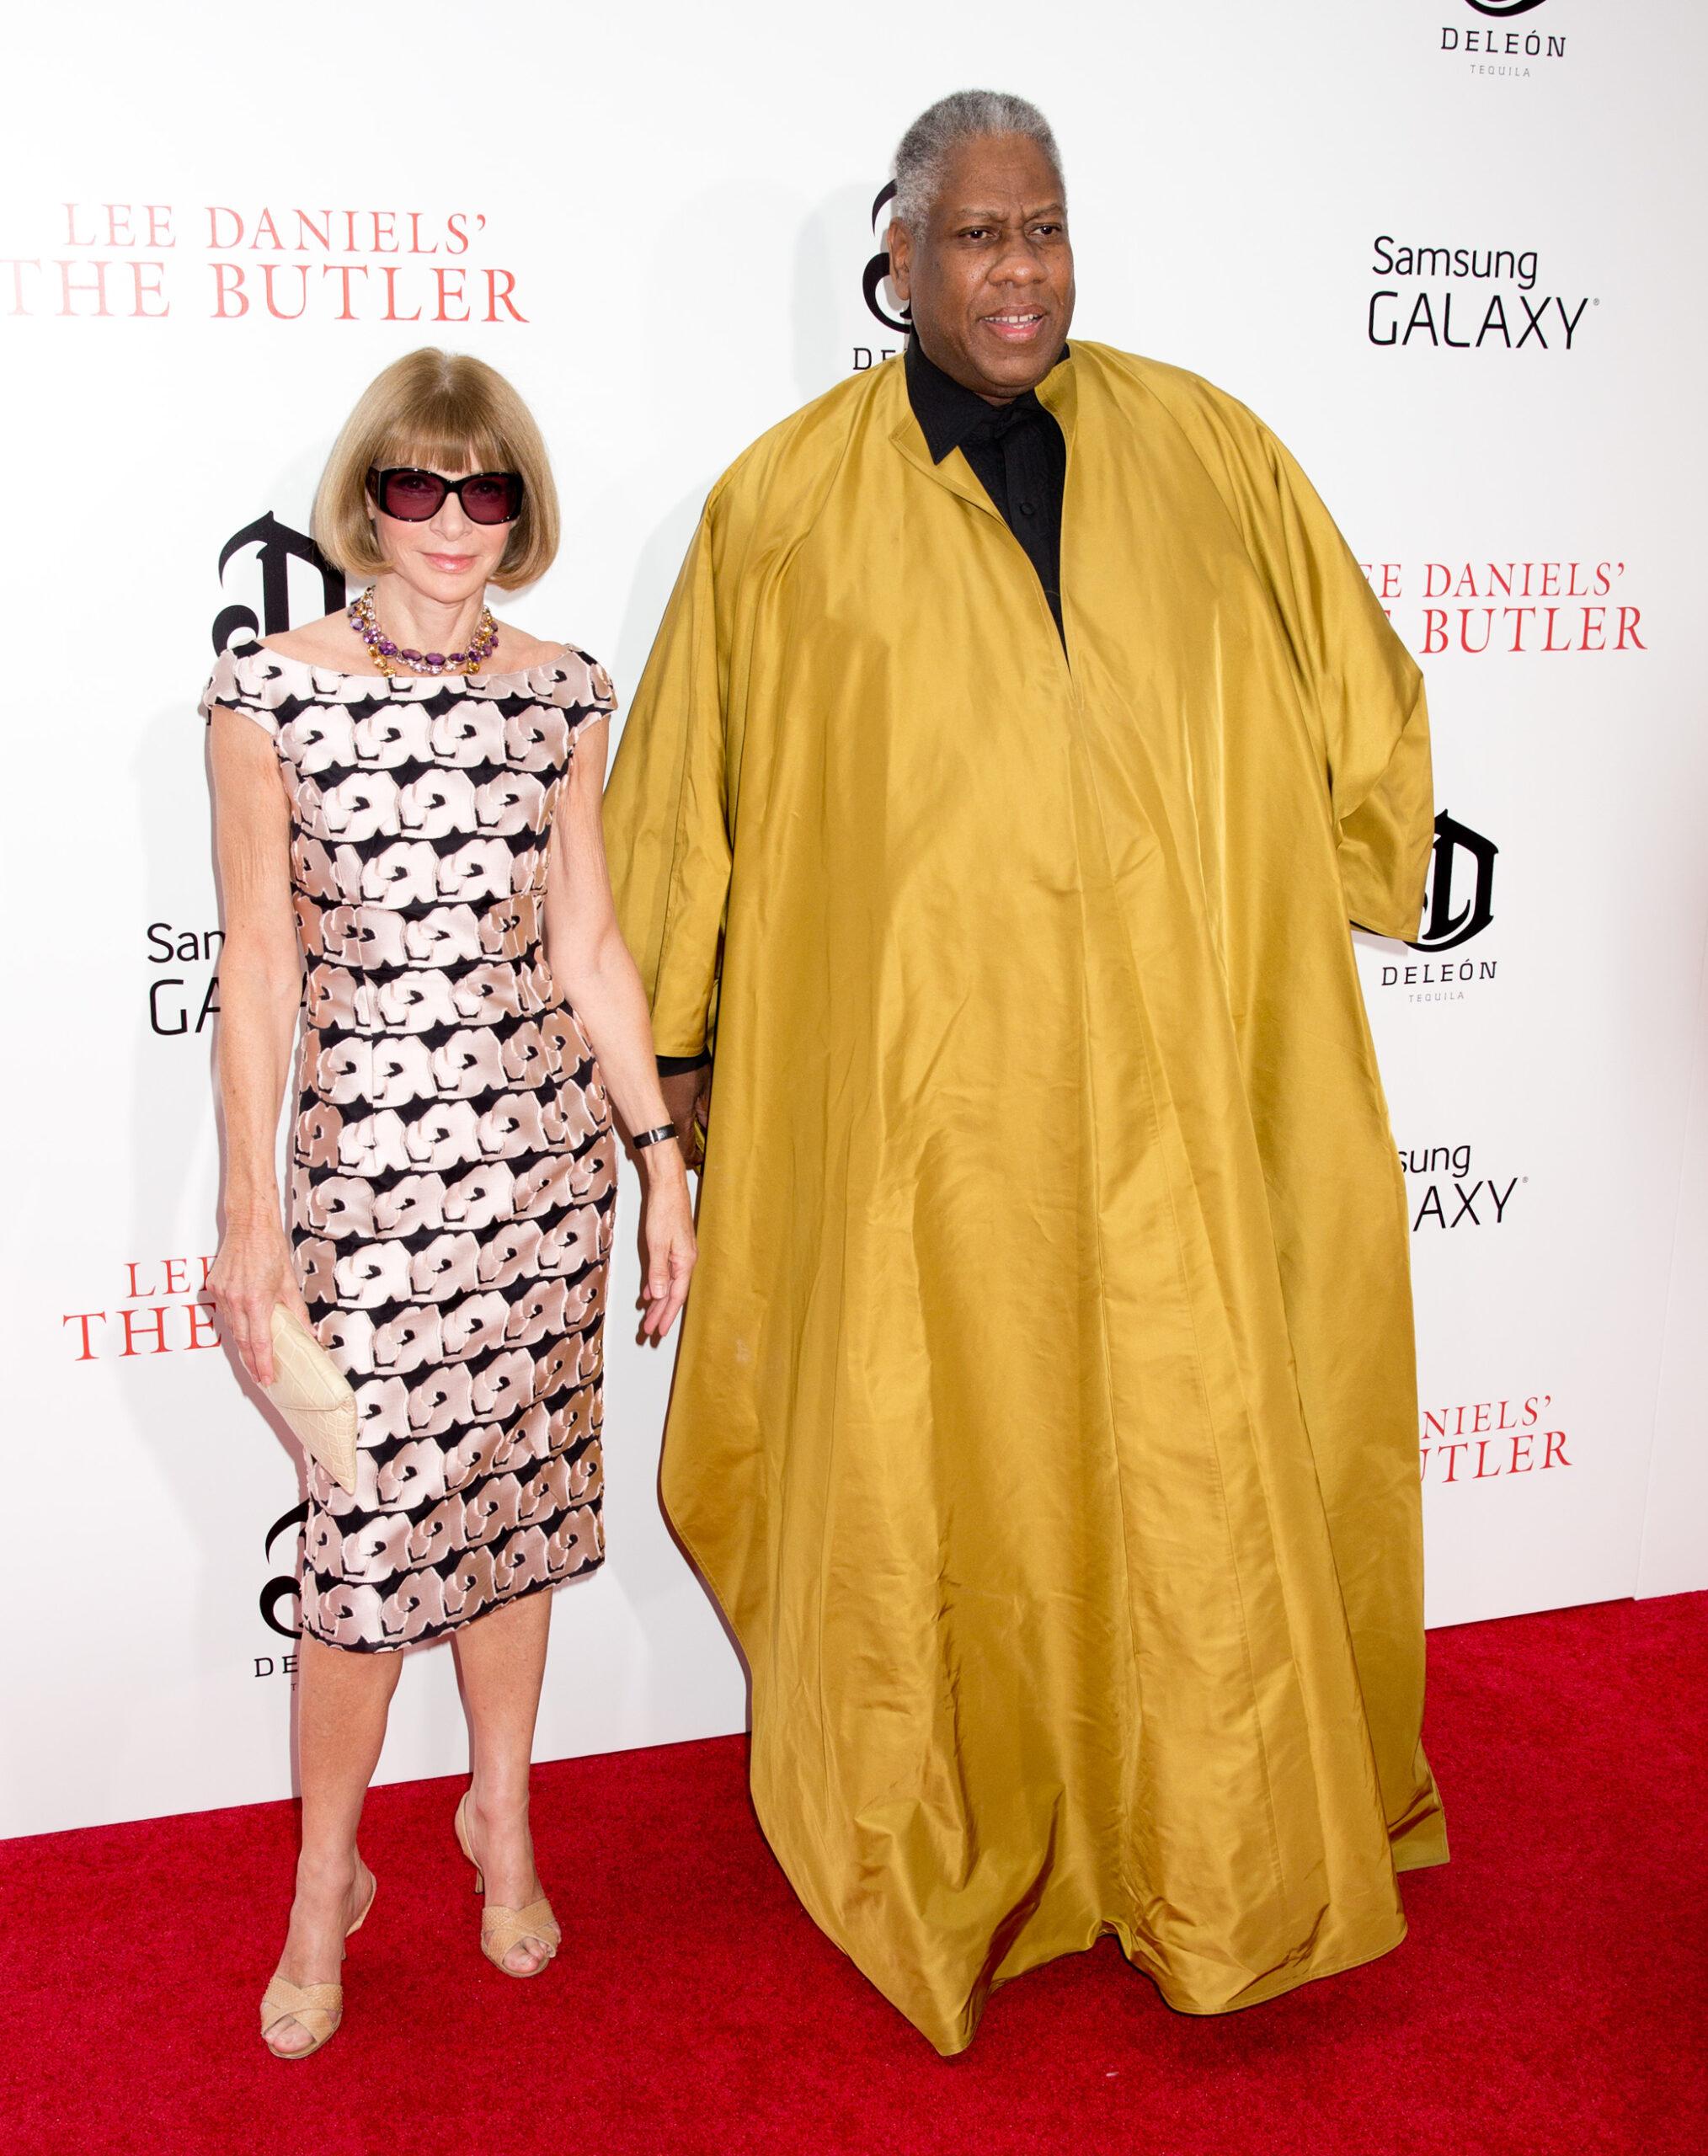 André Leon Talley & Anna Wintour on the red carpet